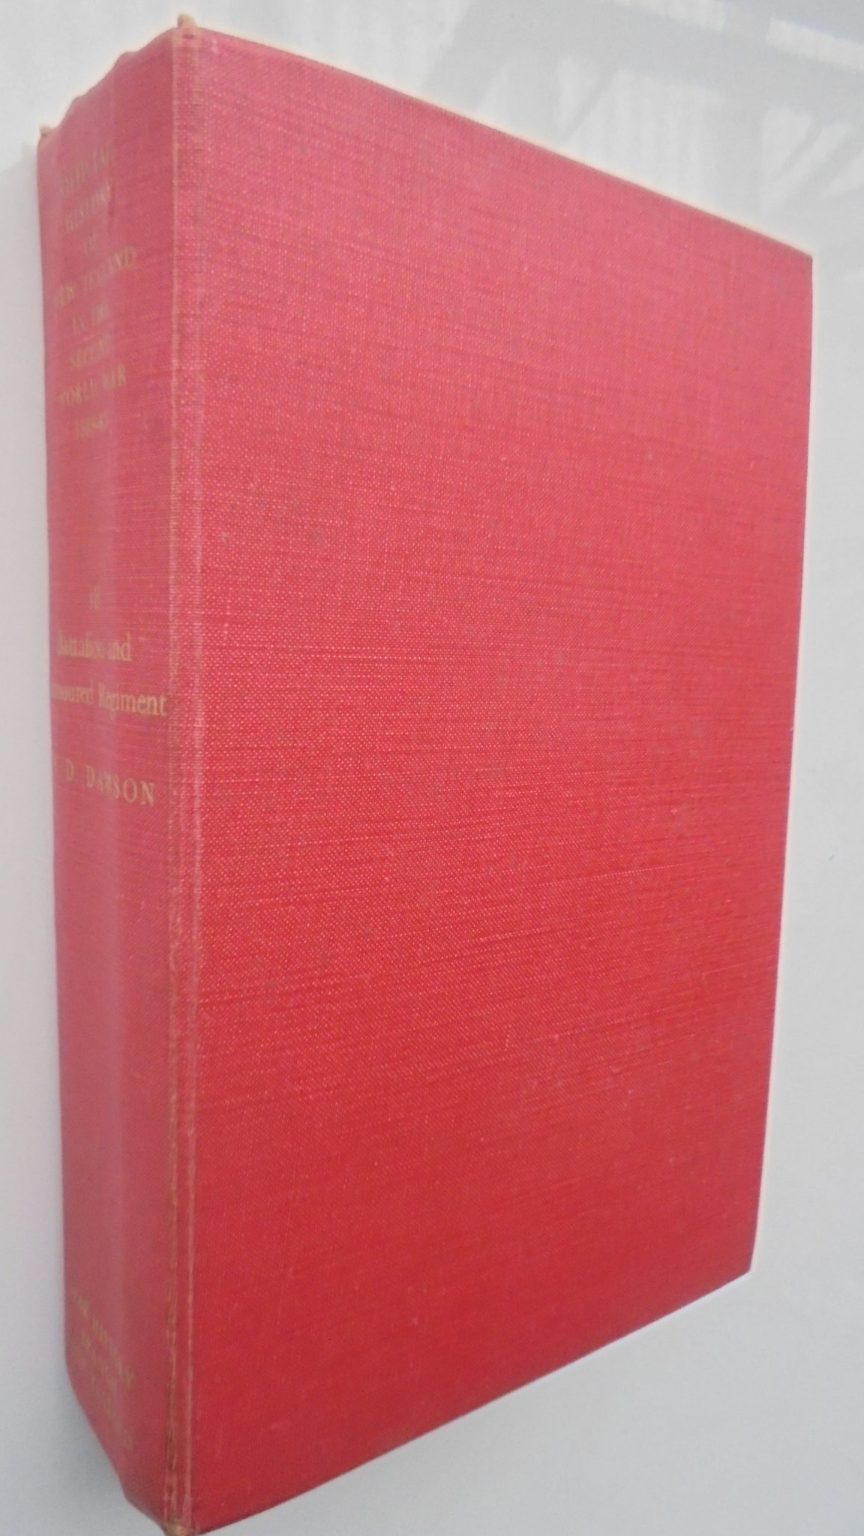 18 Battalion and Armoured Regiment. Official History of New Zealand in the Second World War by W. D. Dawson.